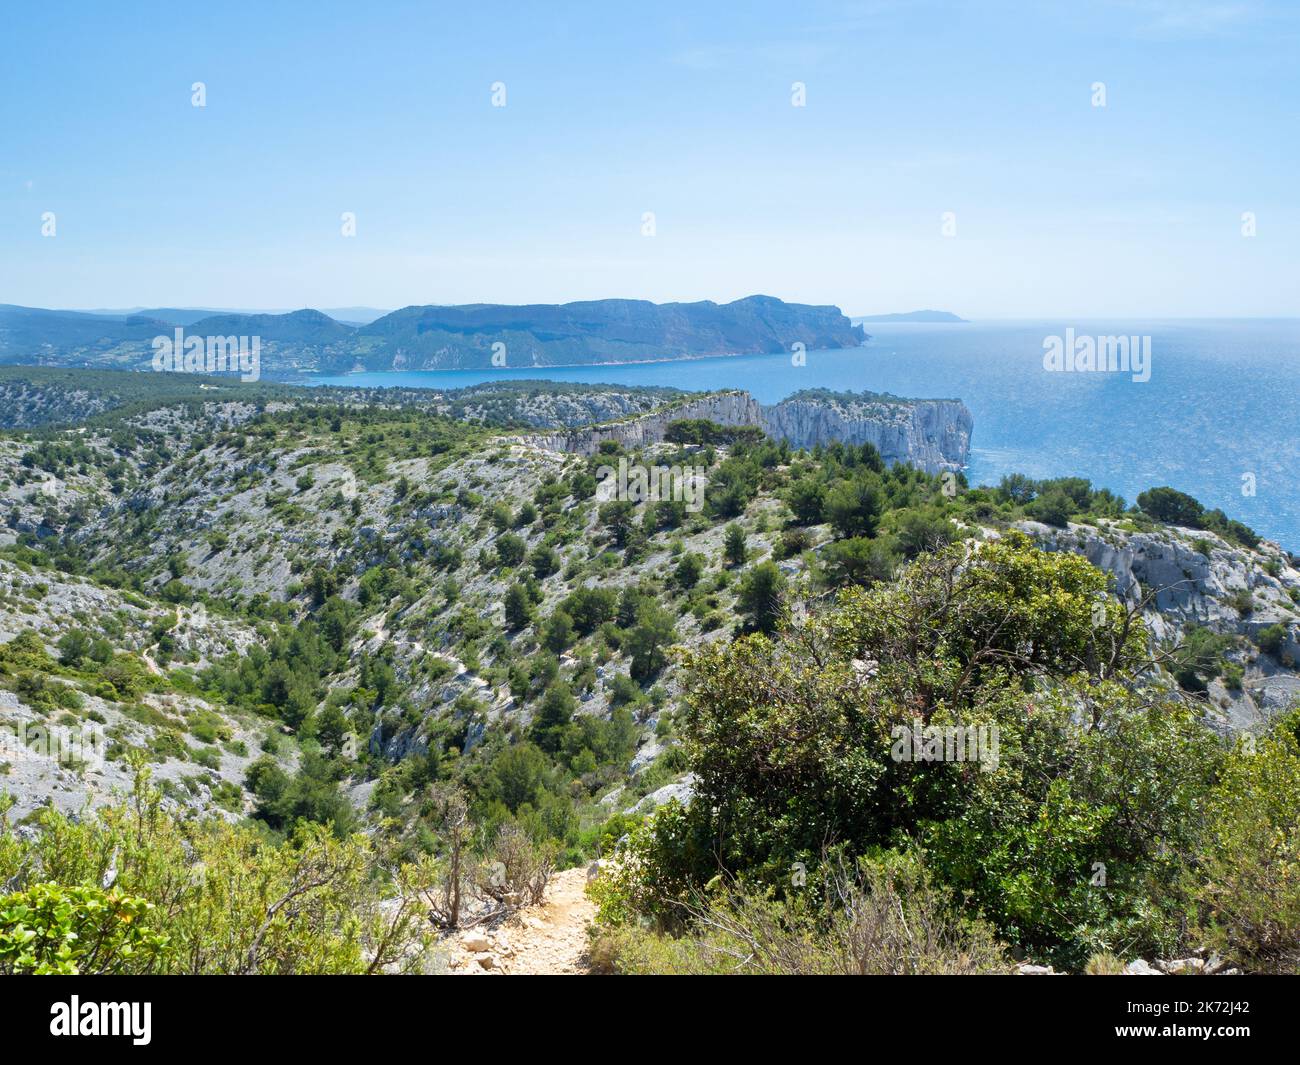 Calanques, France - May 20th 2020: Hiking high above the Mediterranean Sea along a rocky coast Stock Photo